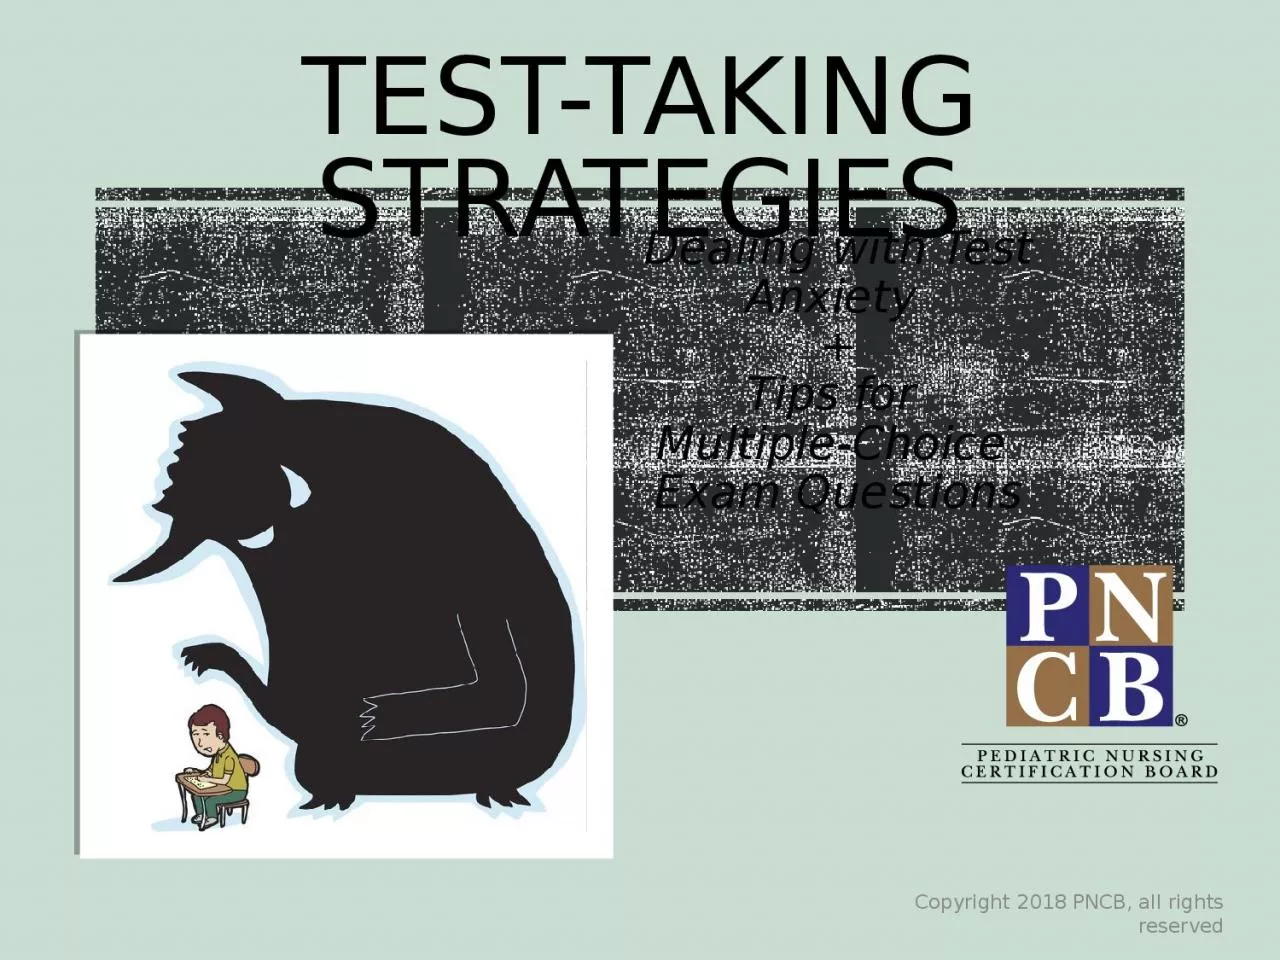 Test-Taking Strategies Dealing with Test